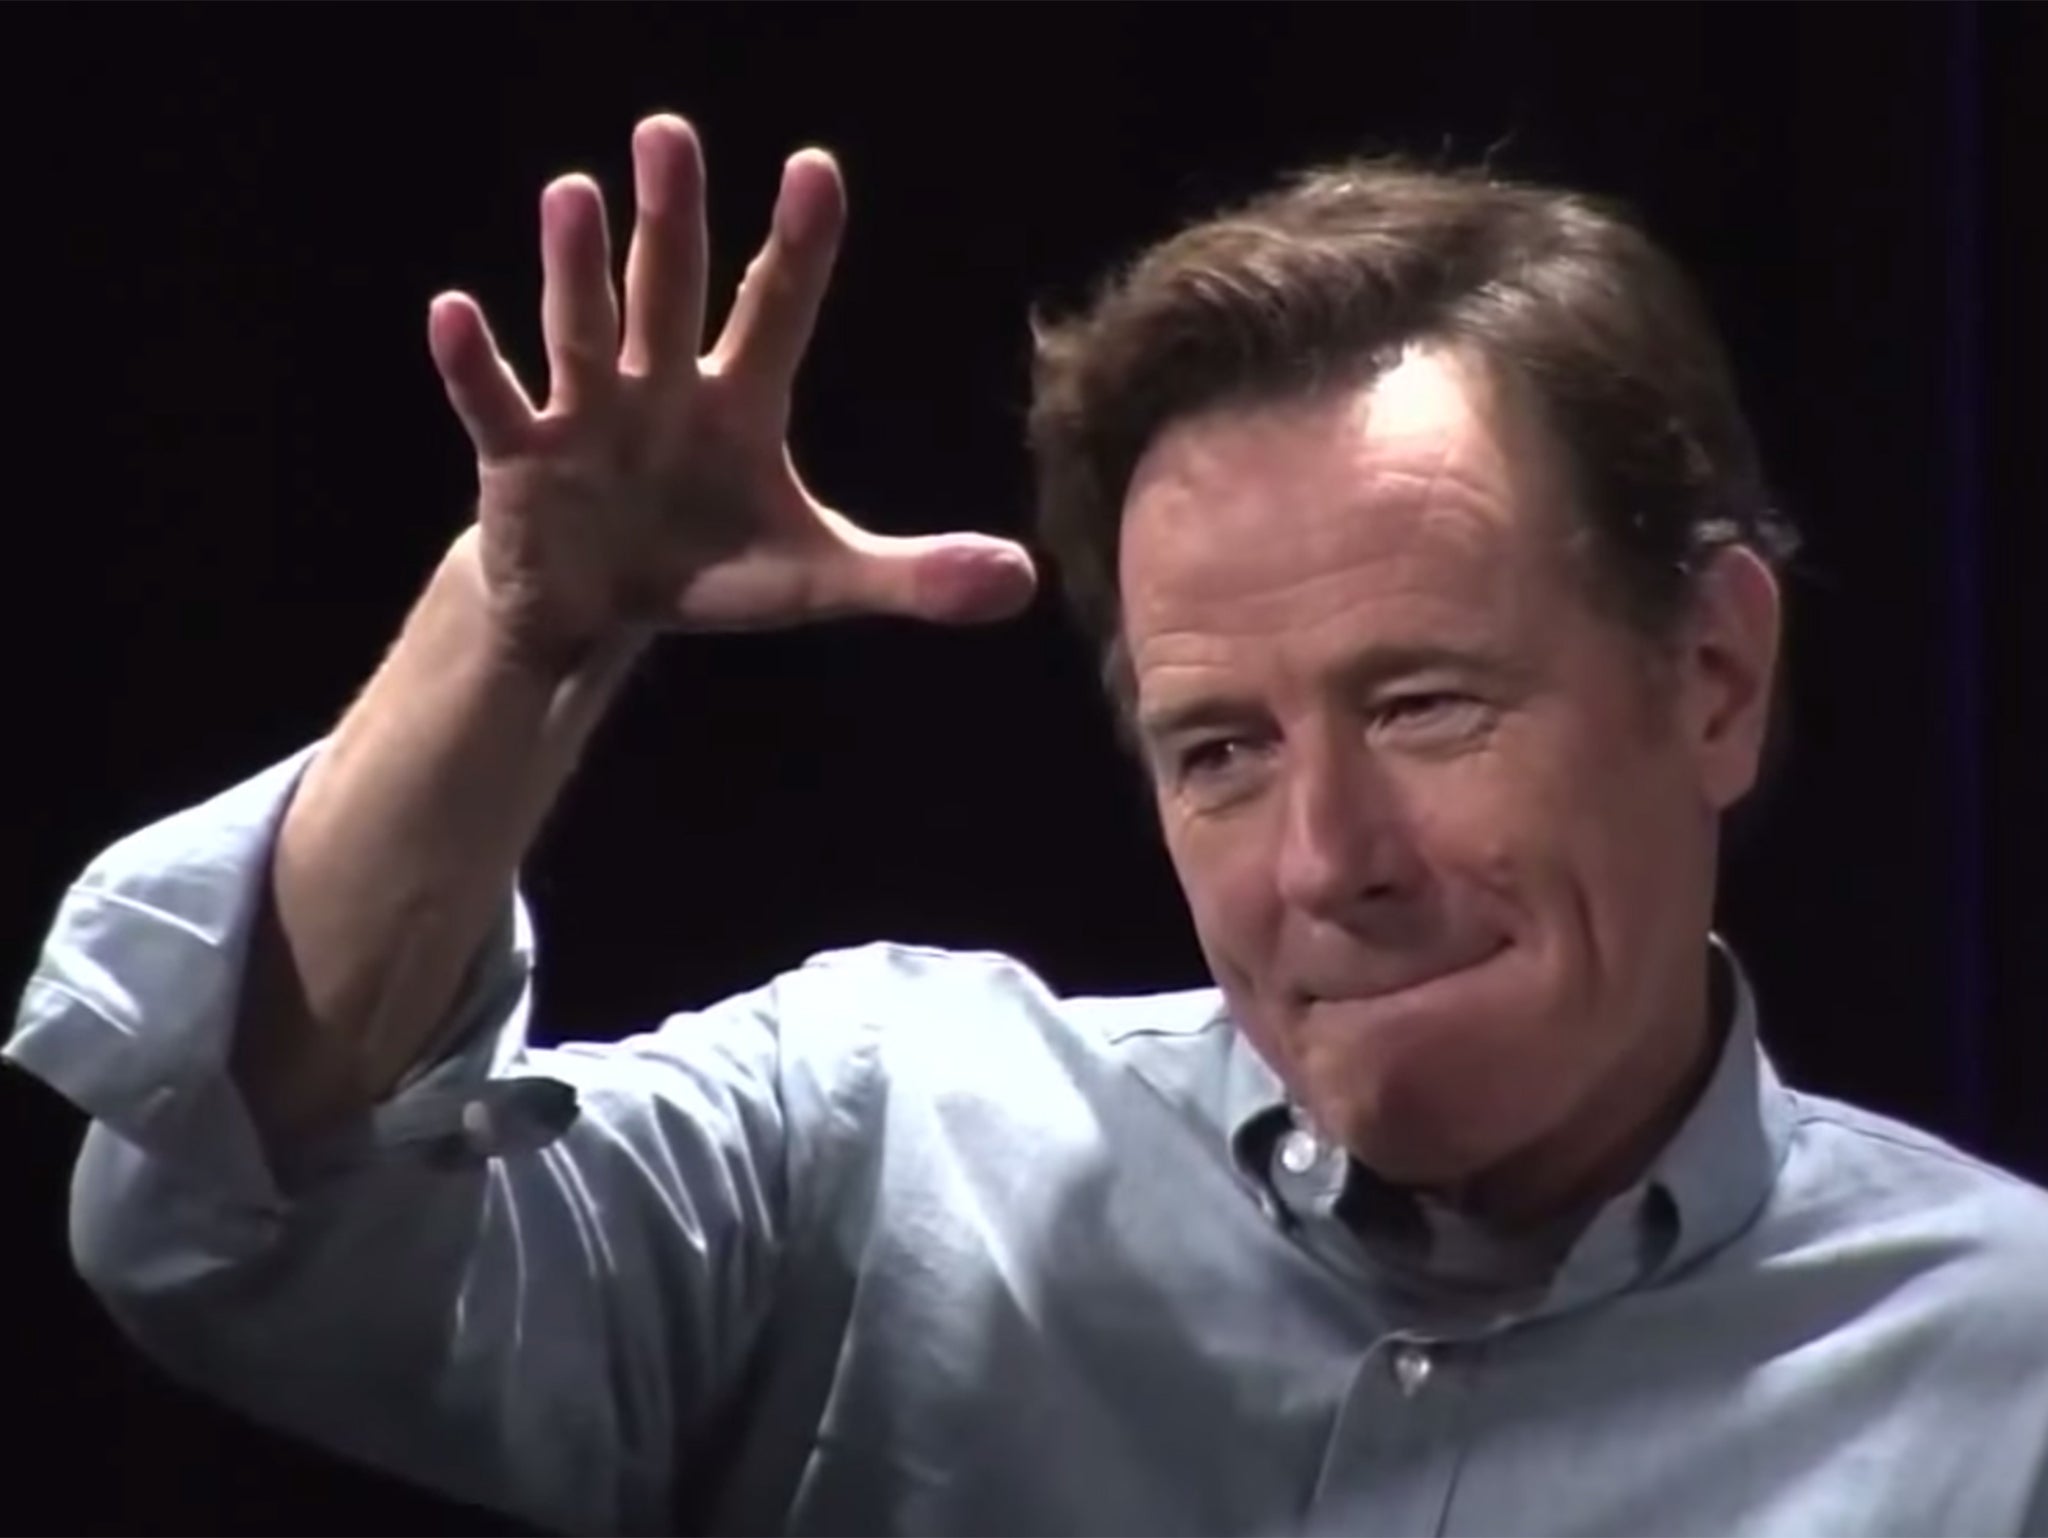 Bryan Cranston's mic drop after owning a fan